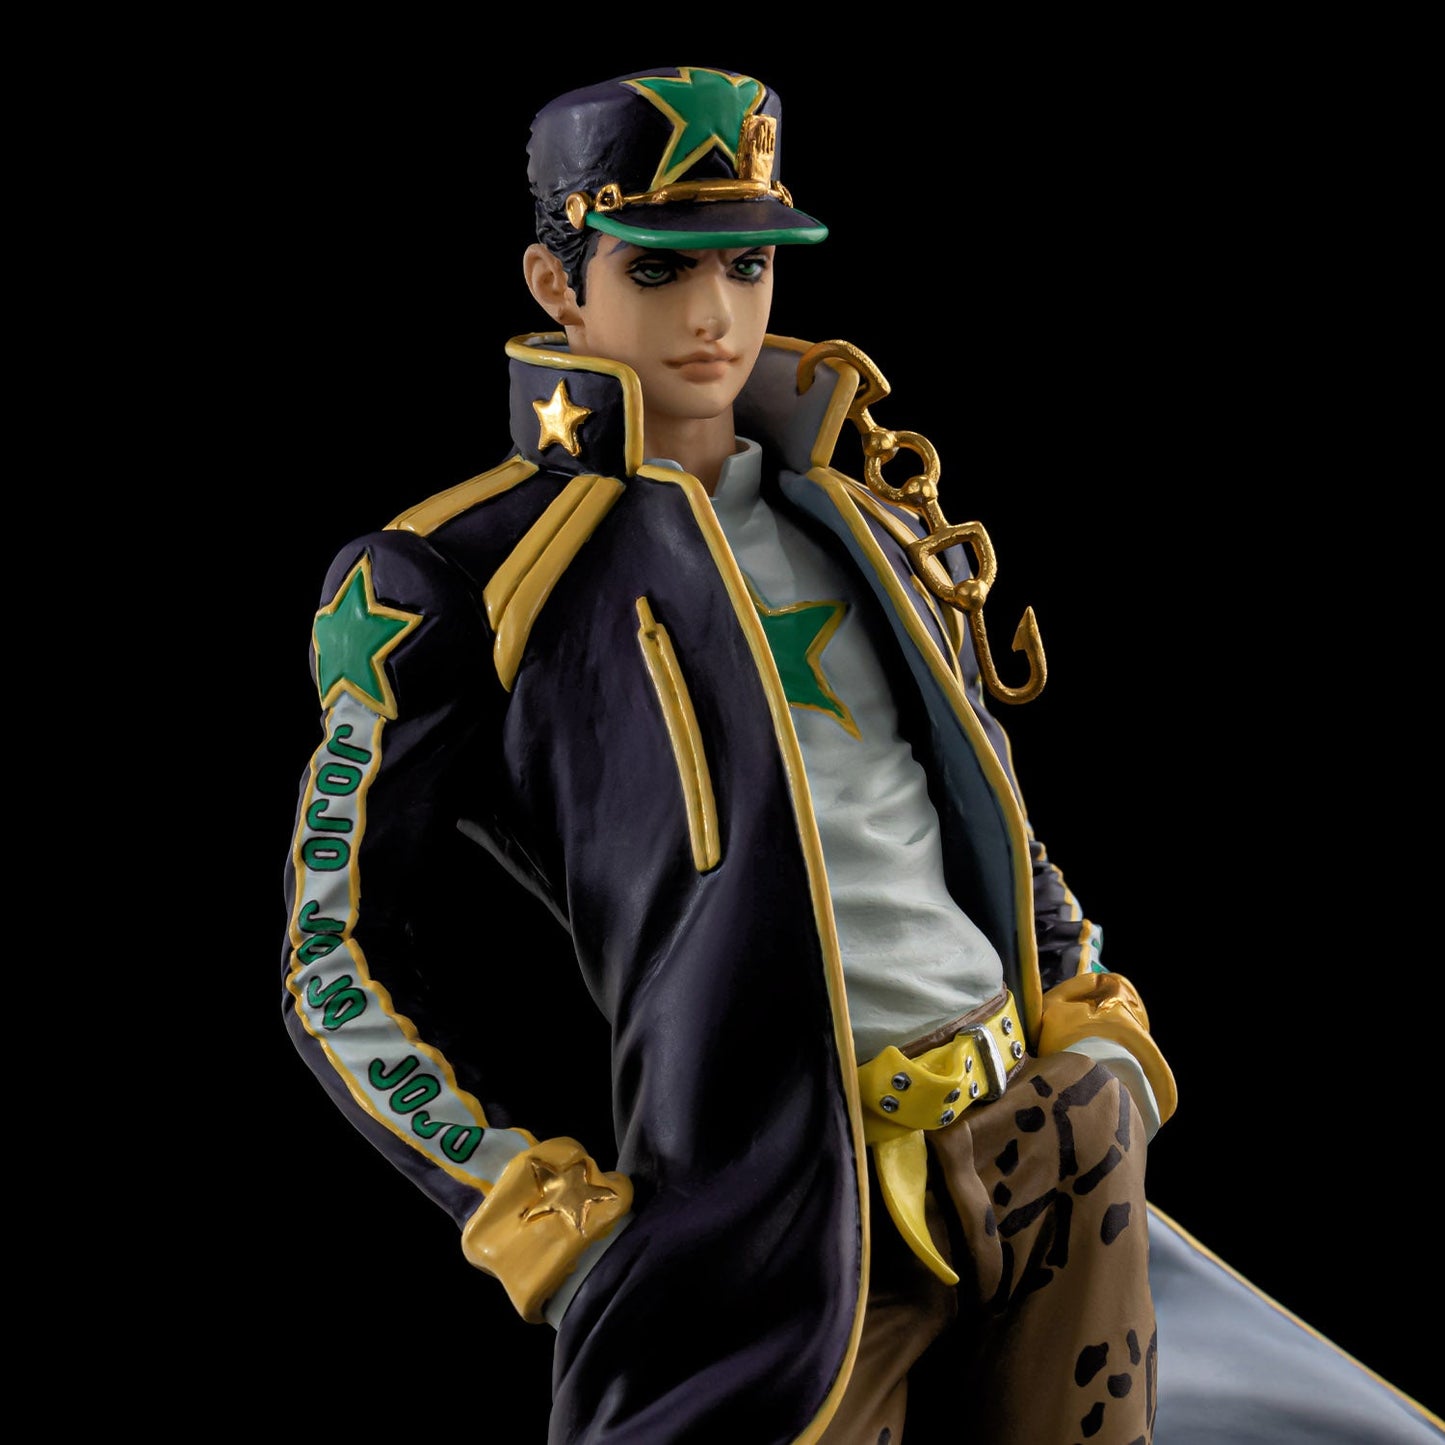 Professional Cosplayer Is a Real-Life Jotaro Kujo